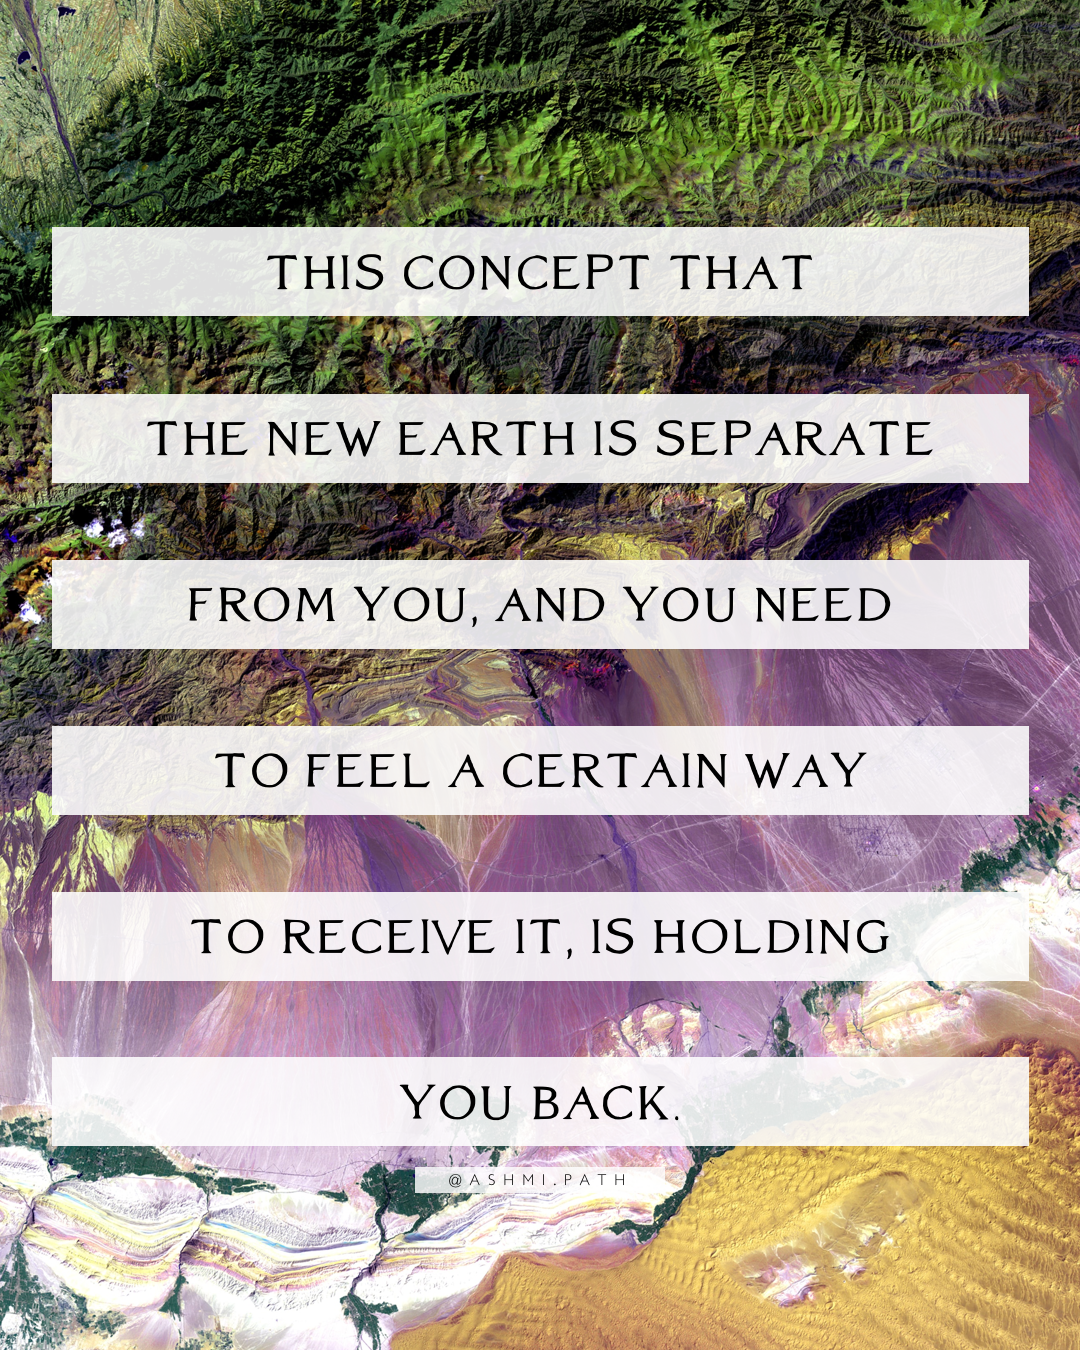 What is Holding You Back from Receiving the New Earth?